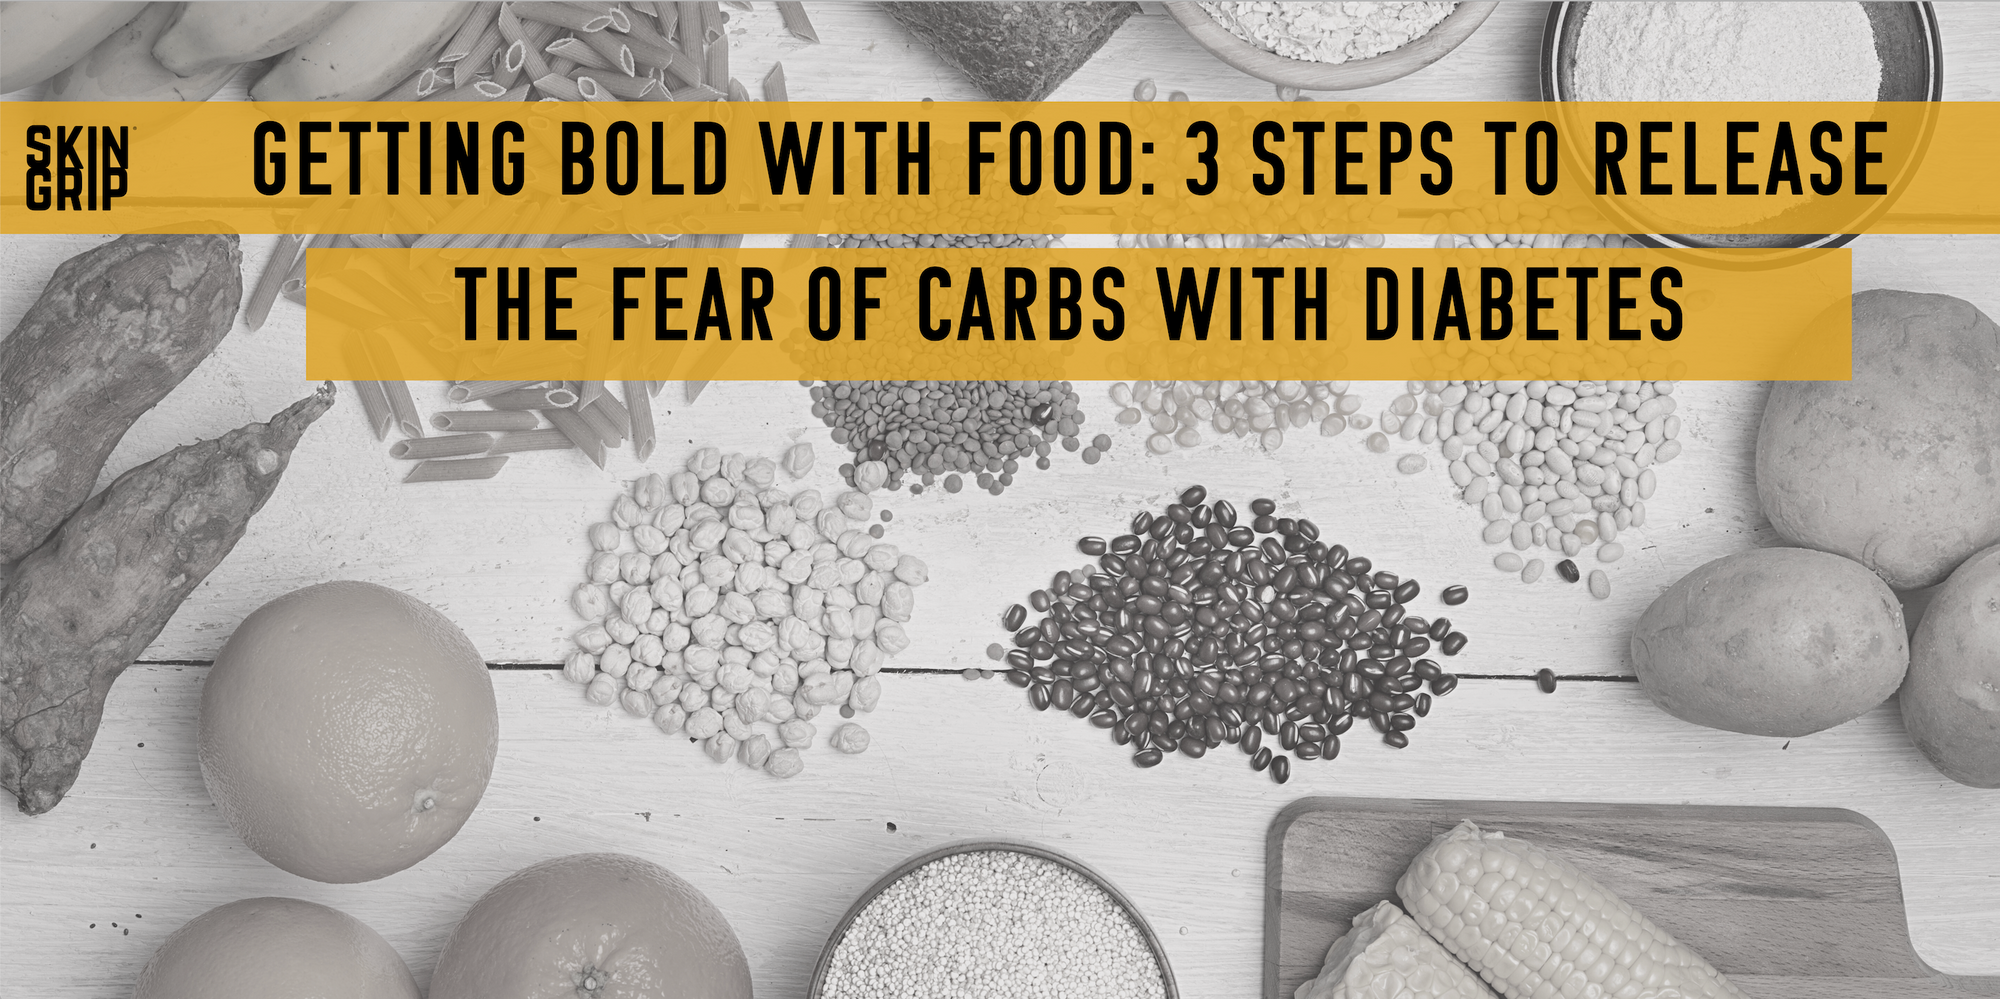 Getting Bold with Food: 3 Steps to Release the Fear of Carbs with Diabetes